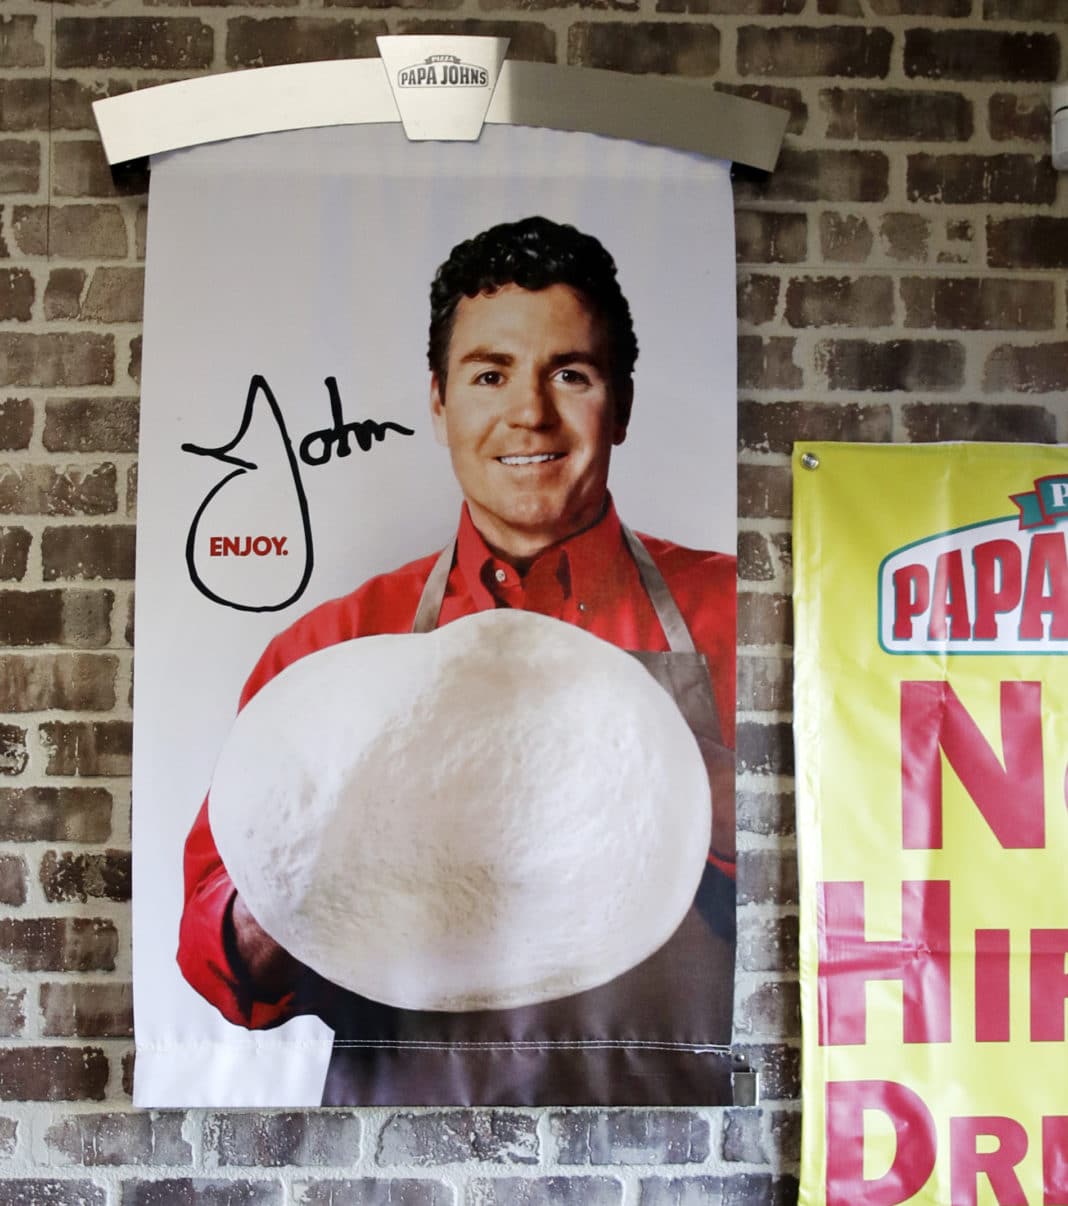 Papa John's Is Pulling Founder's Image From Its Marketing as Fallout